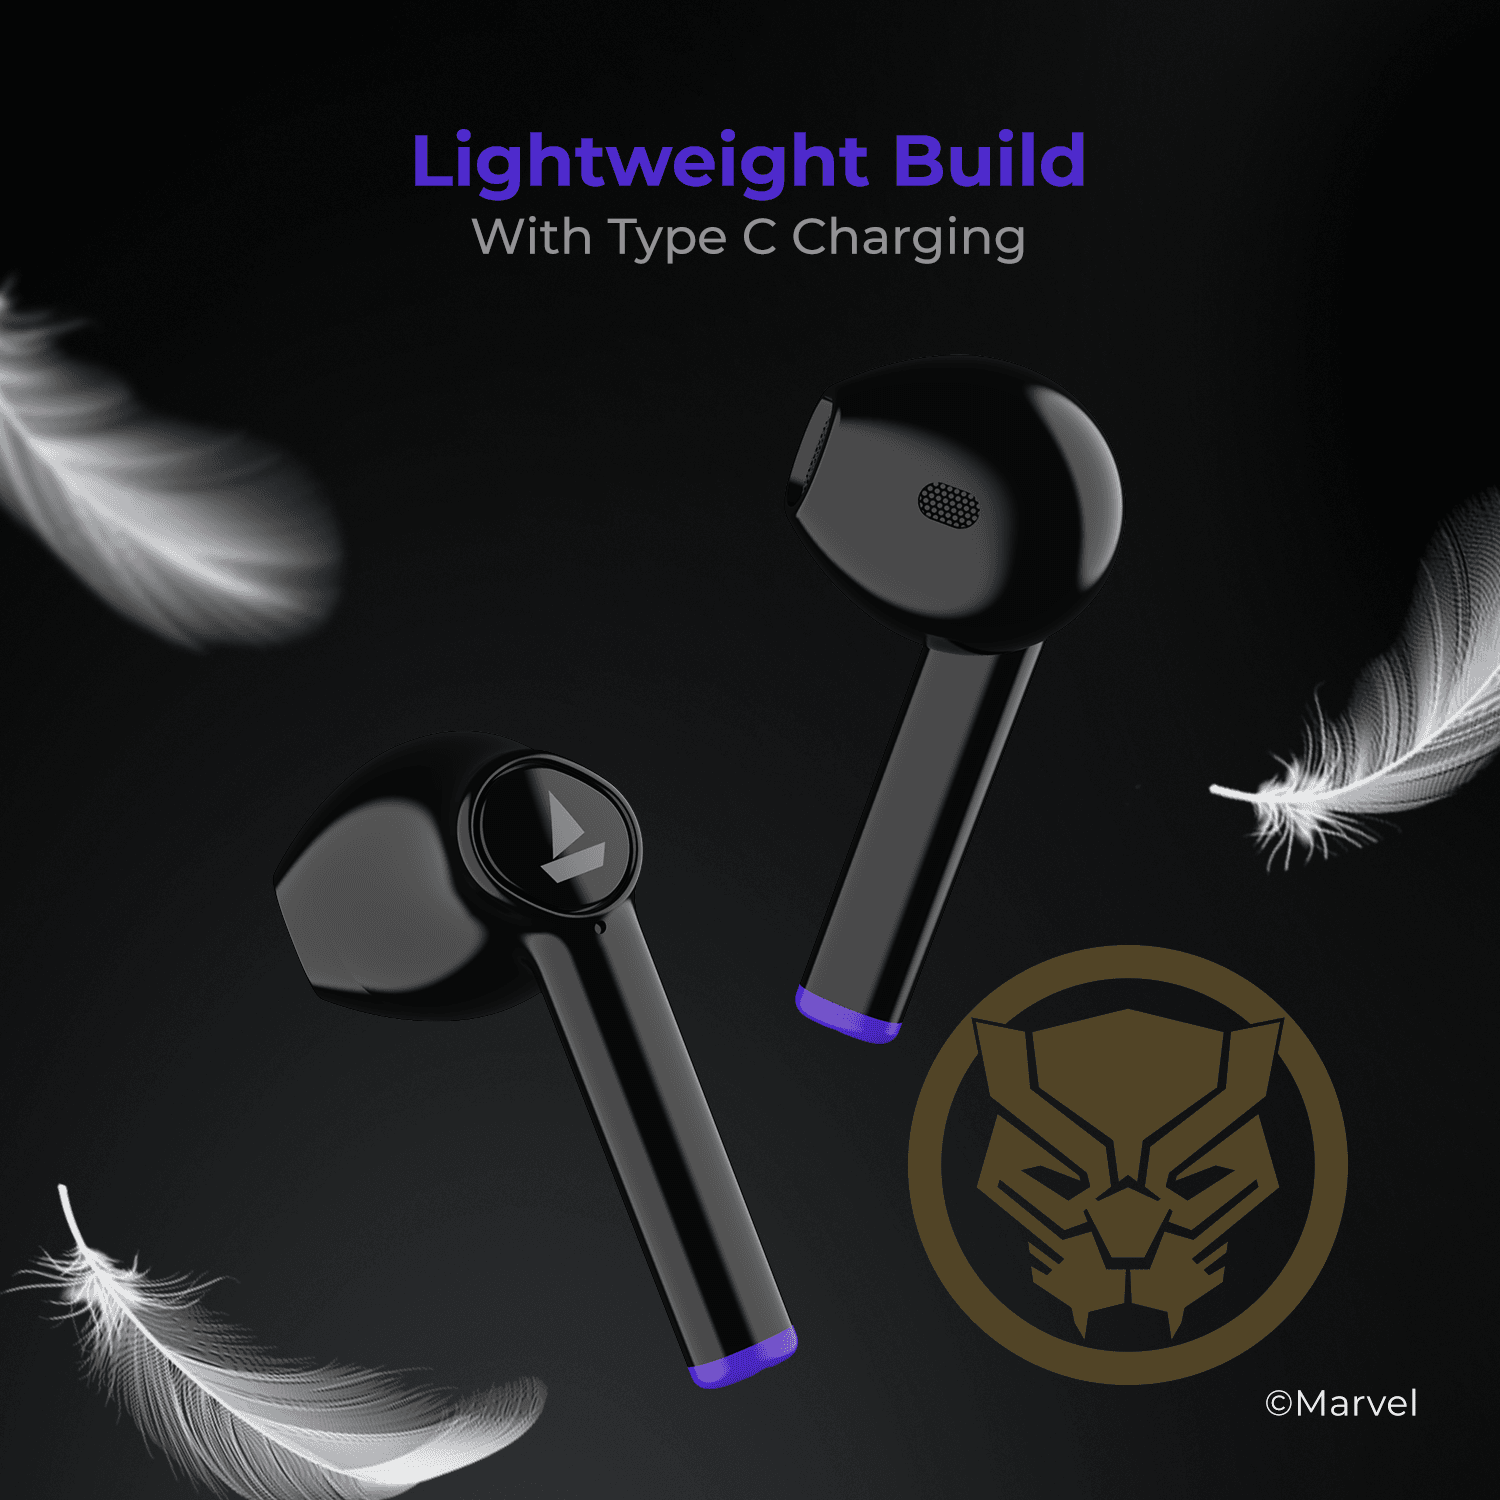 boAt Airdopes 131 Black Panther Marvel Edition | Wireless Earbuds with 13mm Audio Drivers, IWP Technology with Bluetooth v5.0, Type-c Charging, Upto 15 Hours Playback